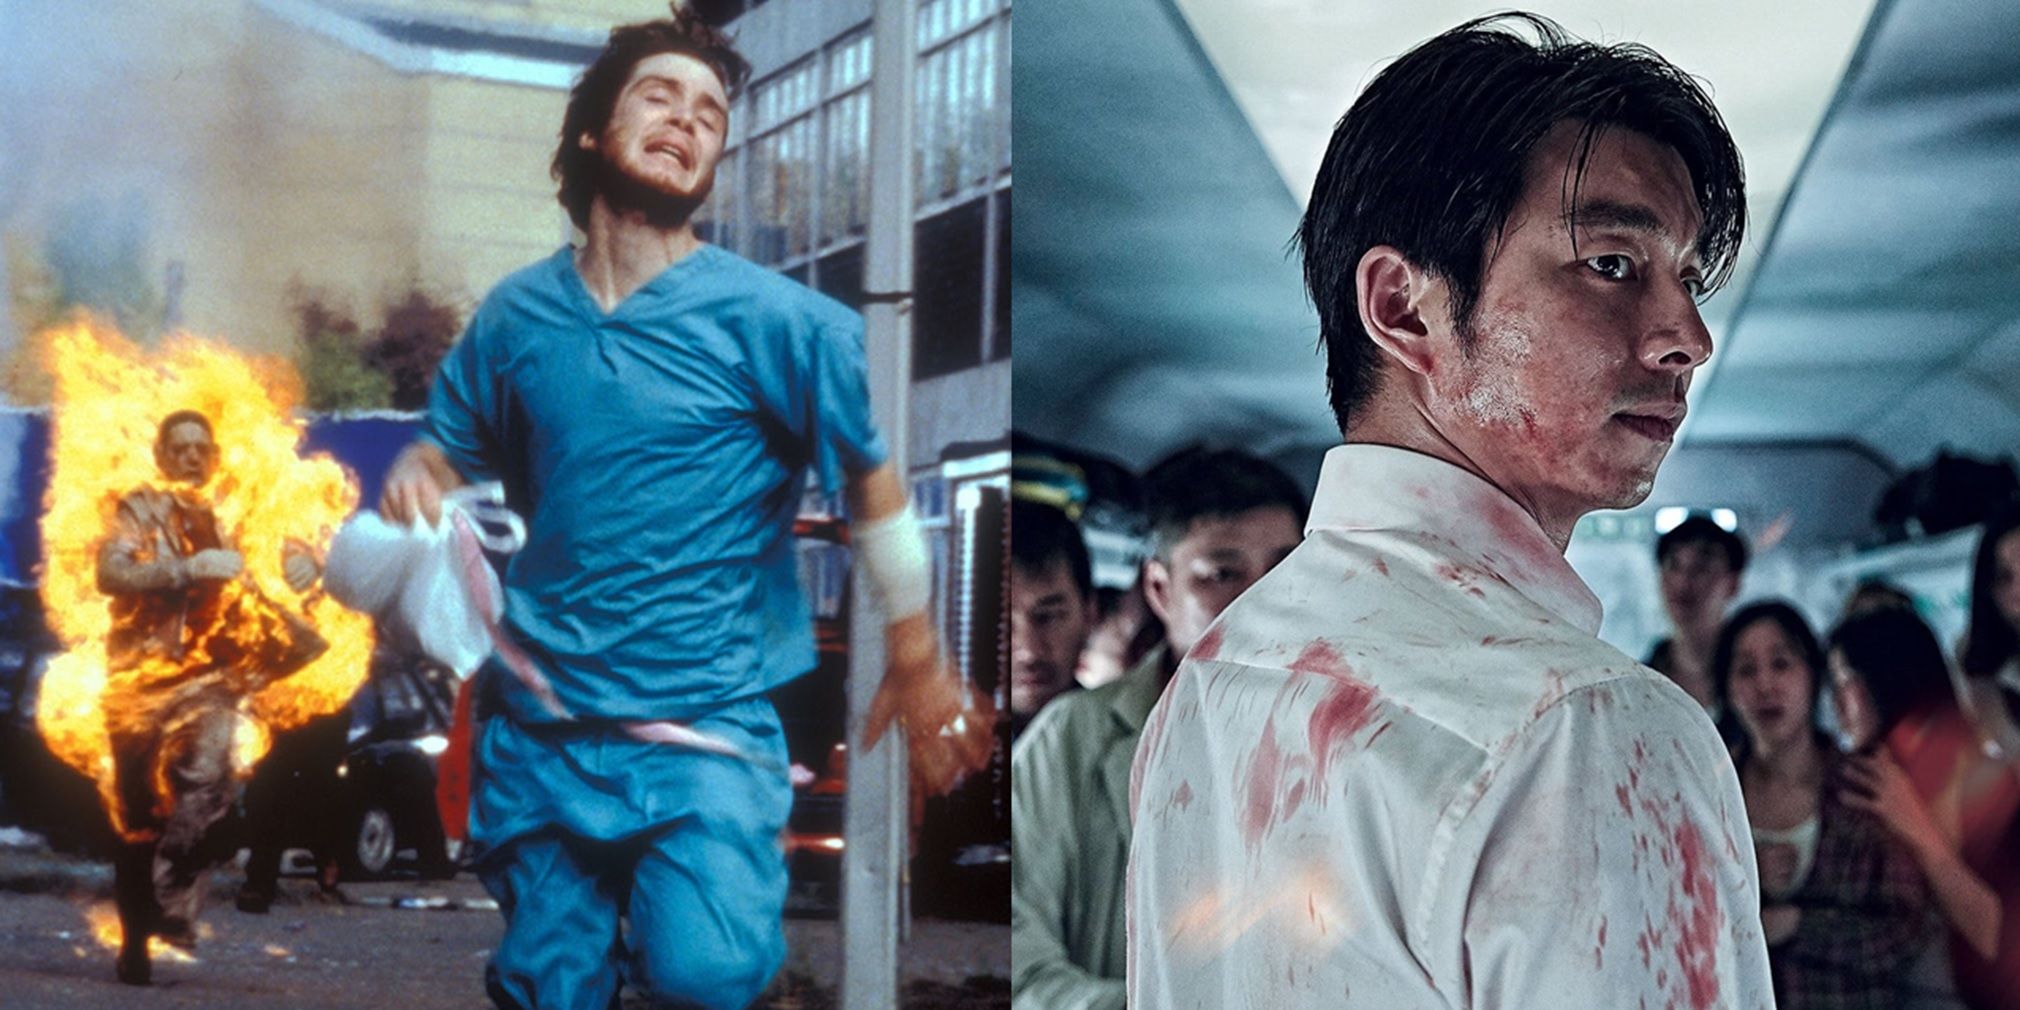 25 Best Images 28 Days Movie Zombie / 28 Days Later And 28 Weeks Later May Get A Sequel Time